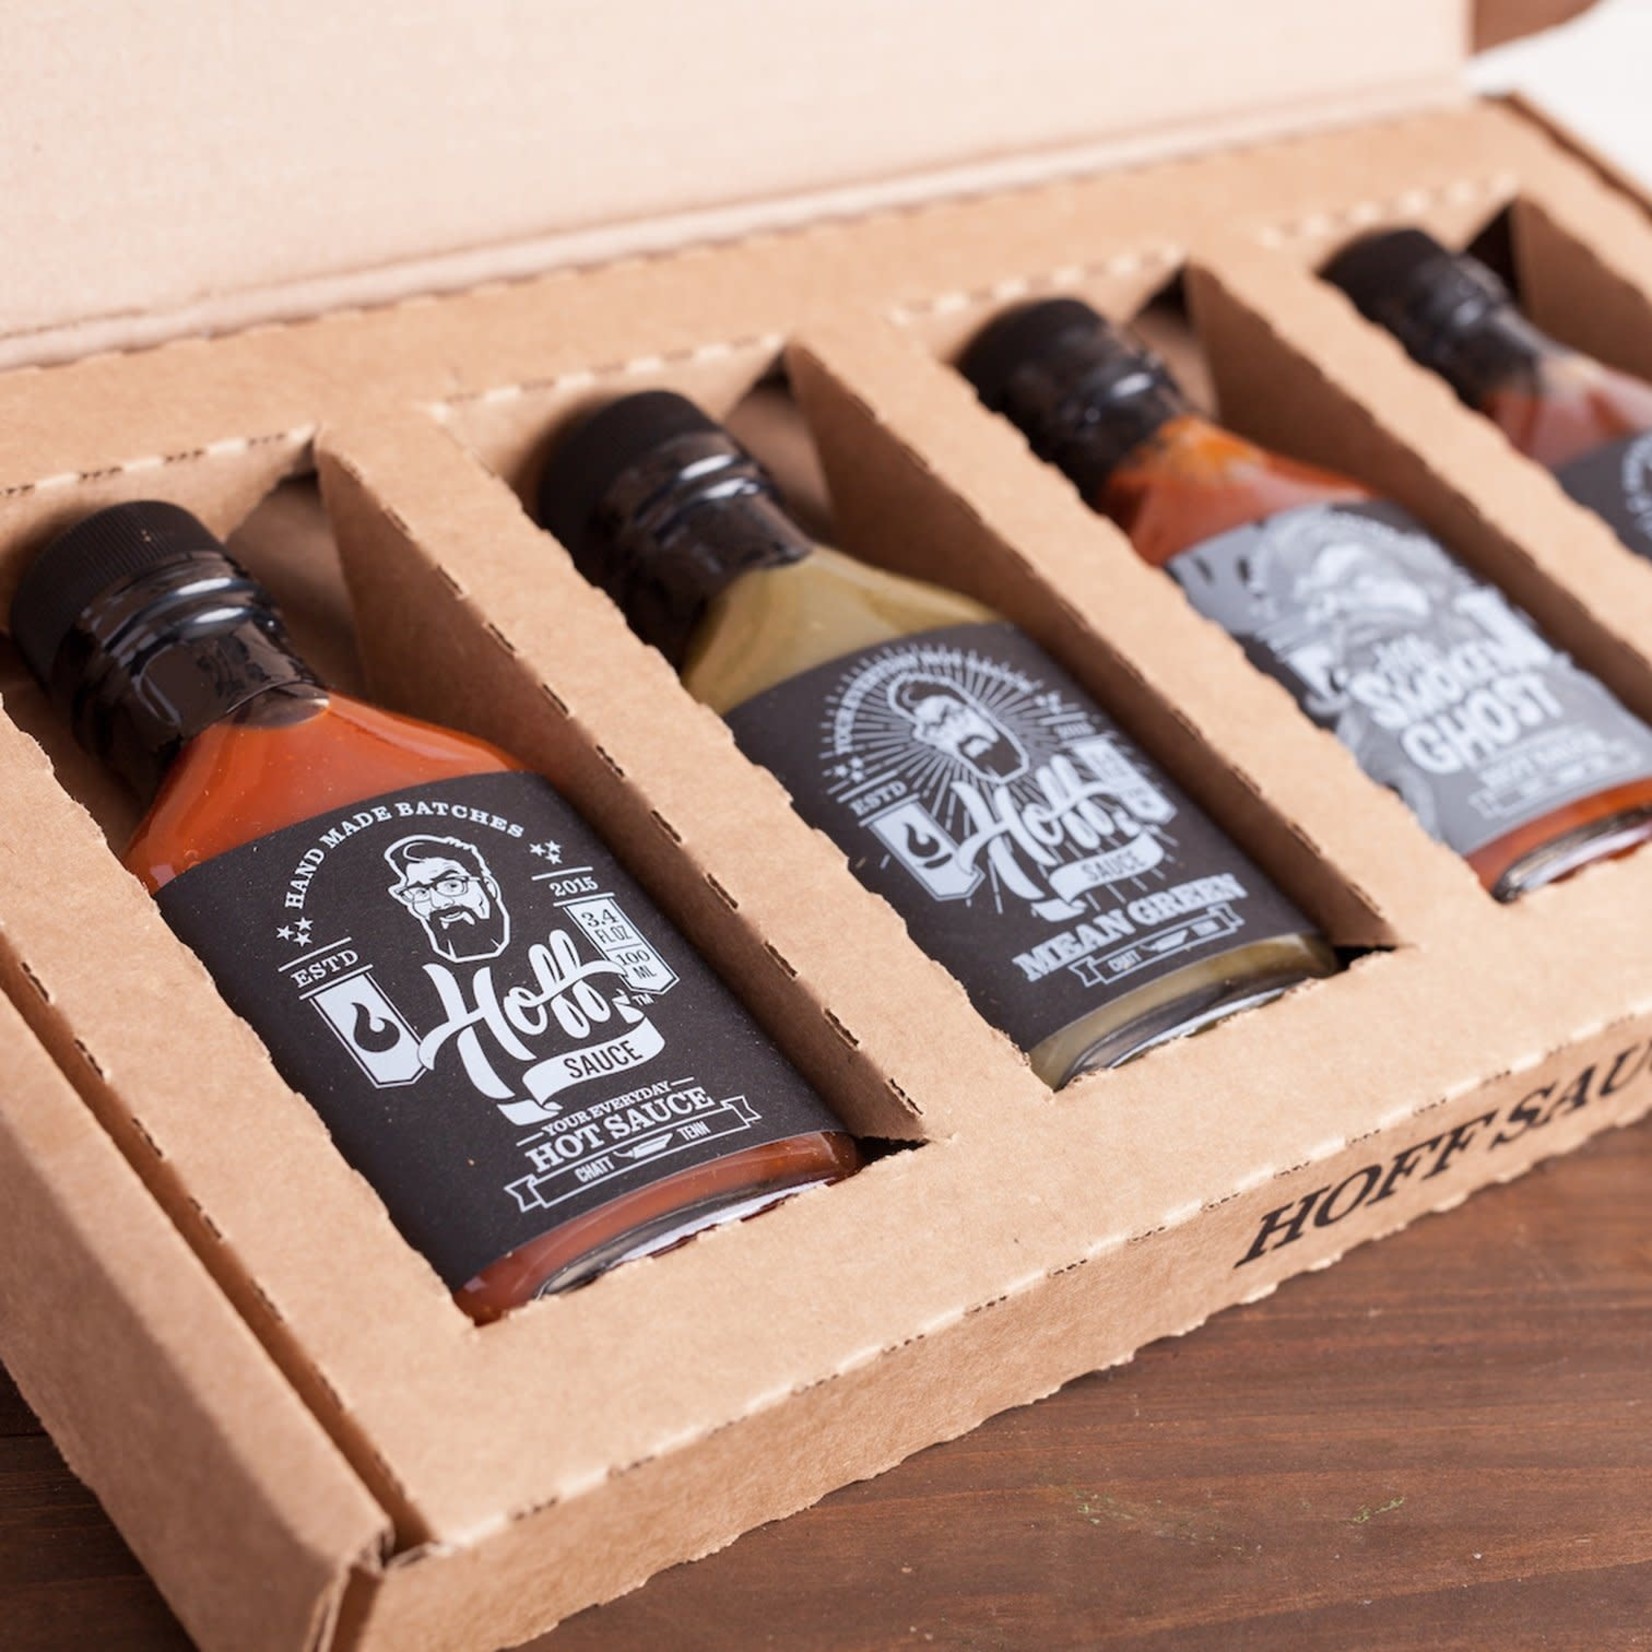 Hoff & Pepper - Small Batch Tennessee Hot Sauces & More